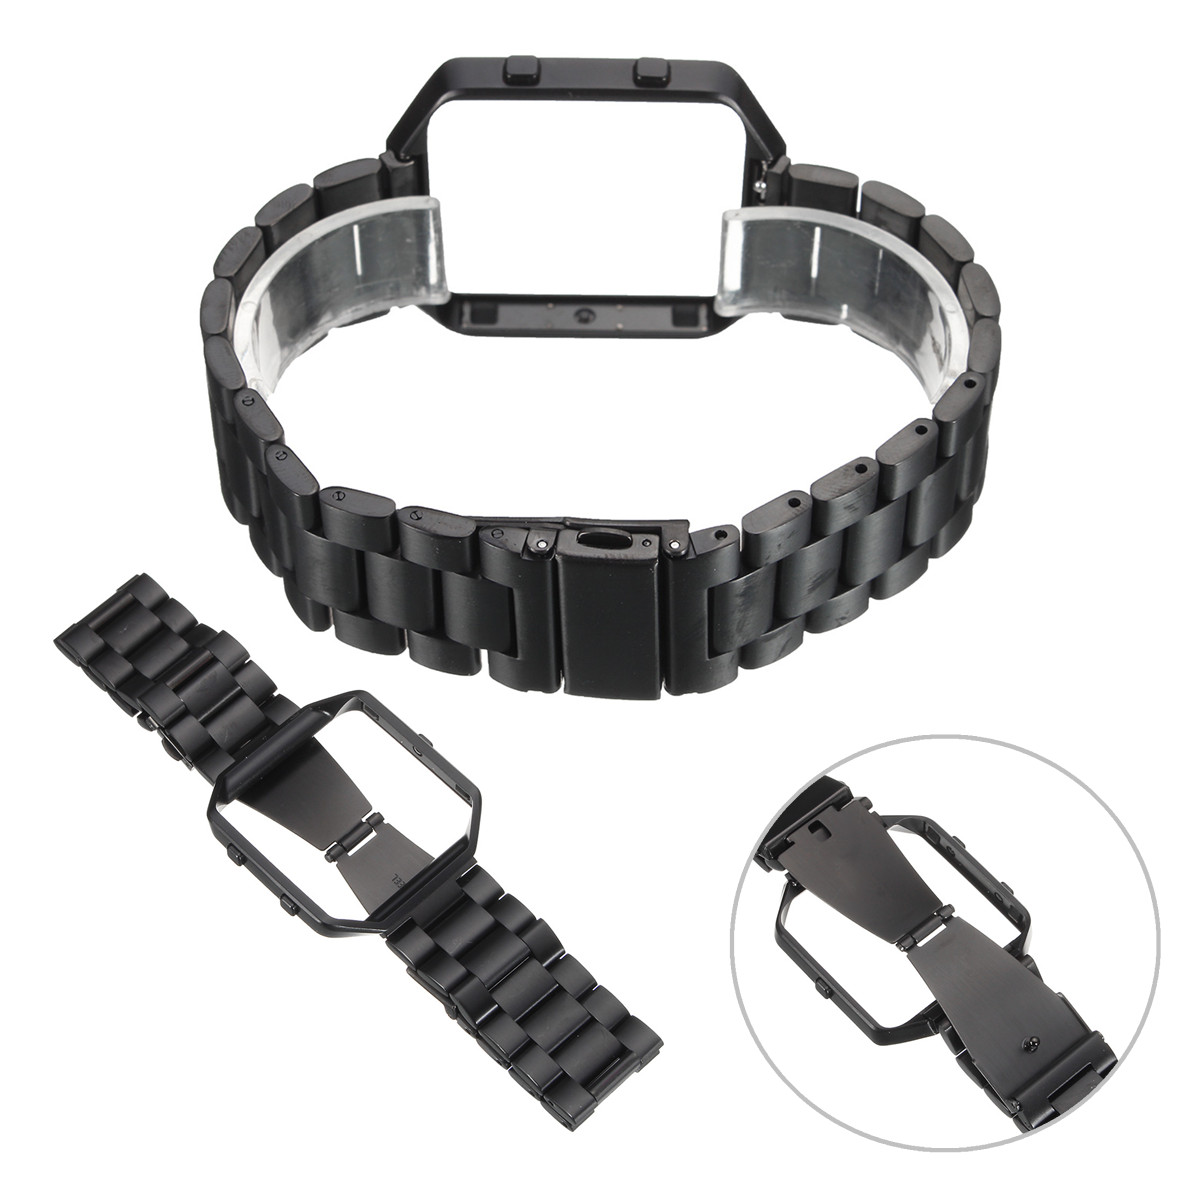 Bakeey-Steel-Metal-Frame-Watch-Case-Cover-Frame-Watch-Band-For-Fitbit-Blaze-Watch-1639063-6